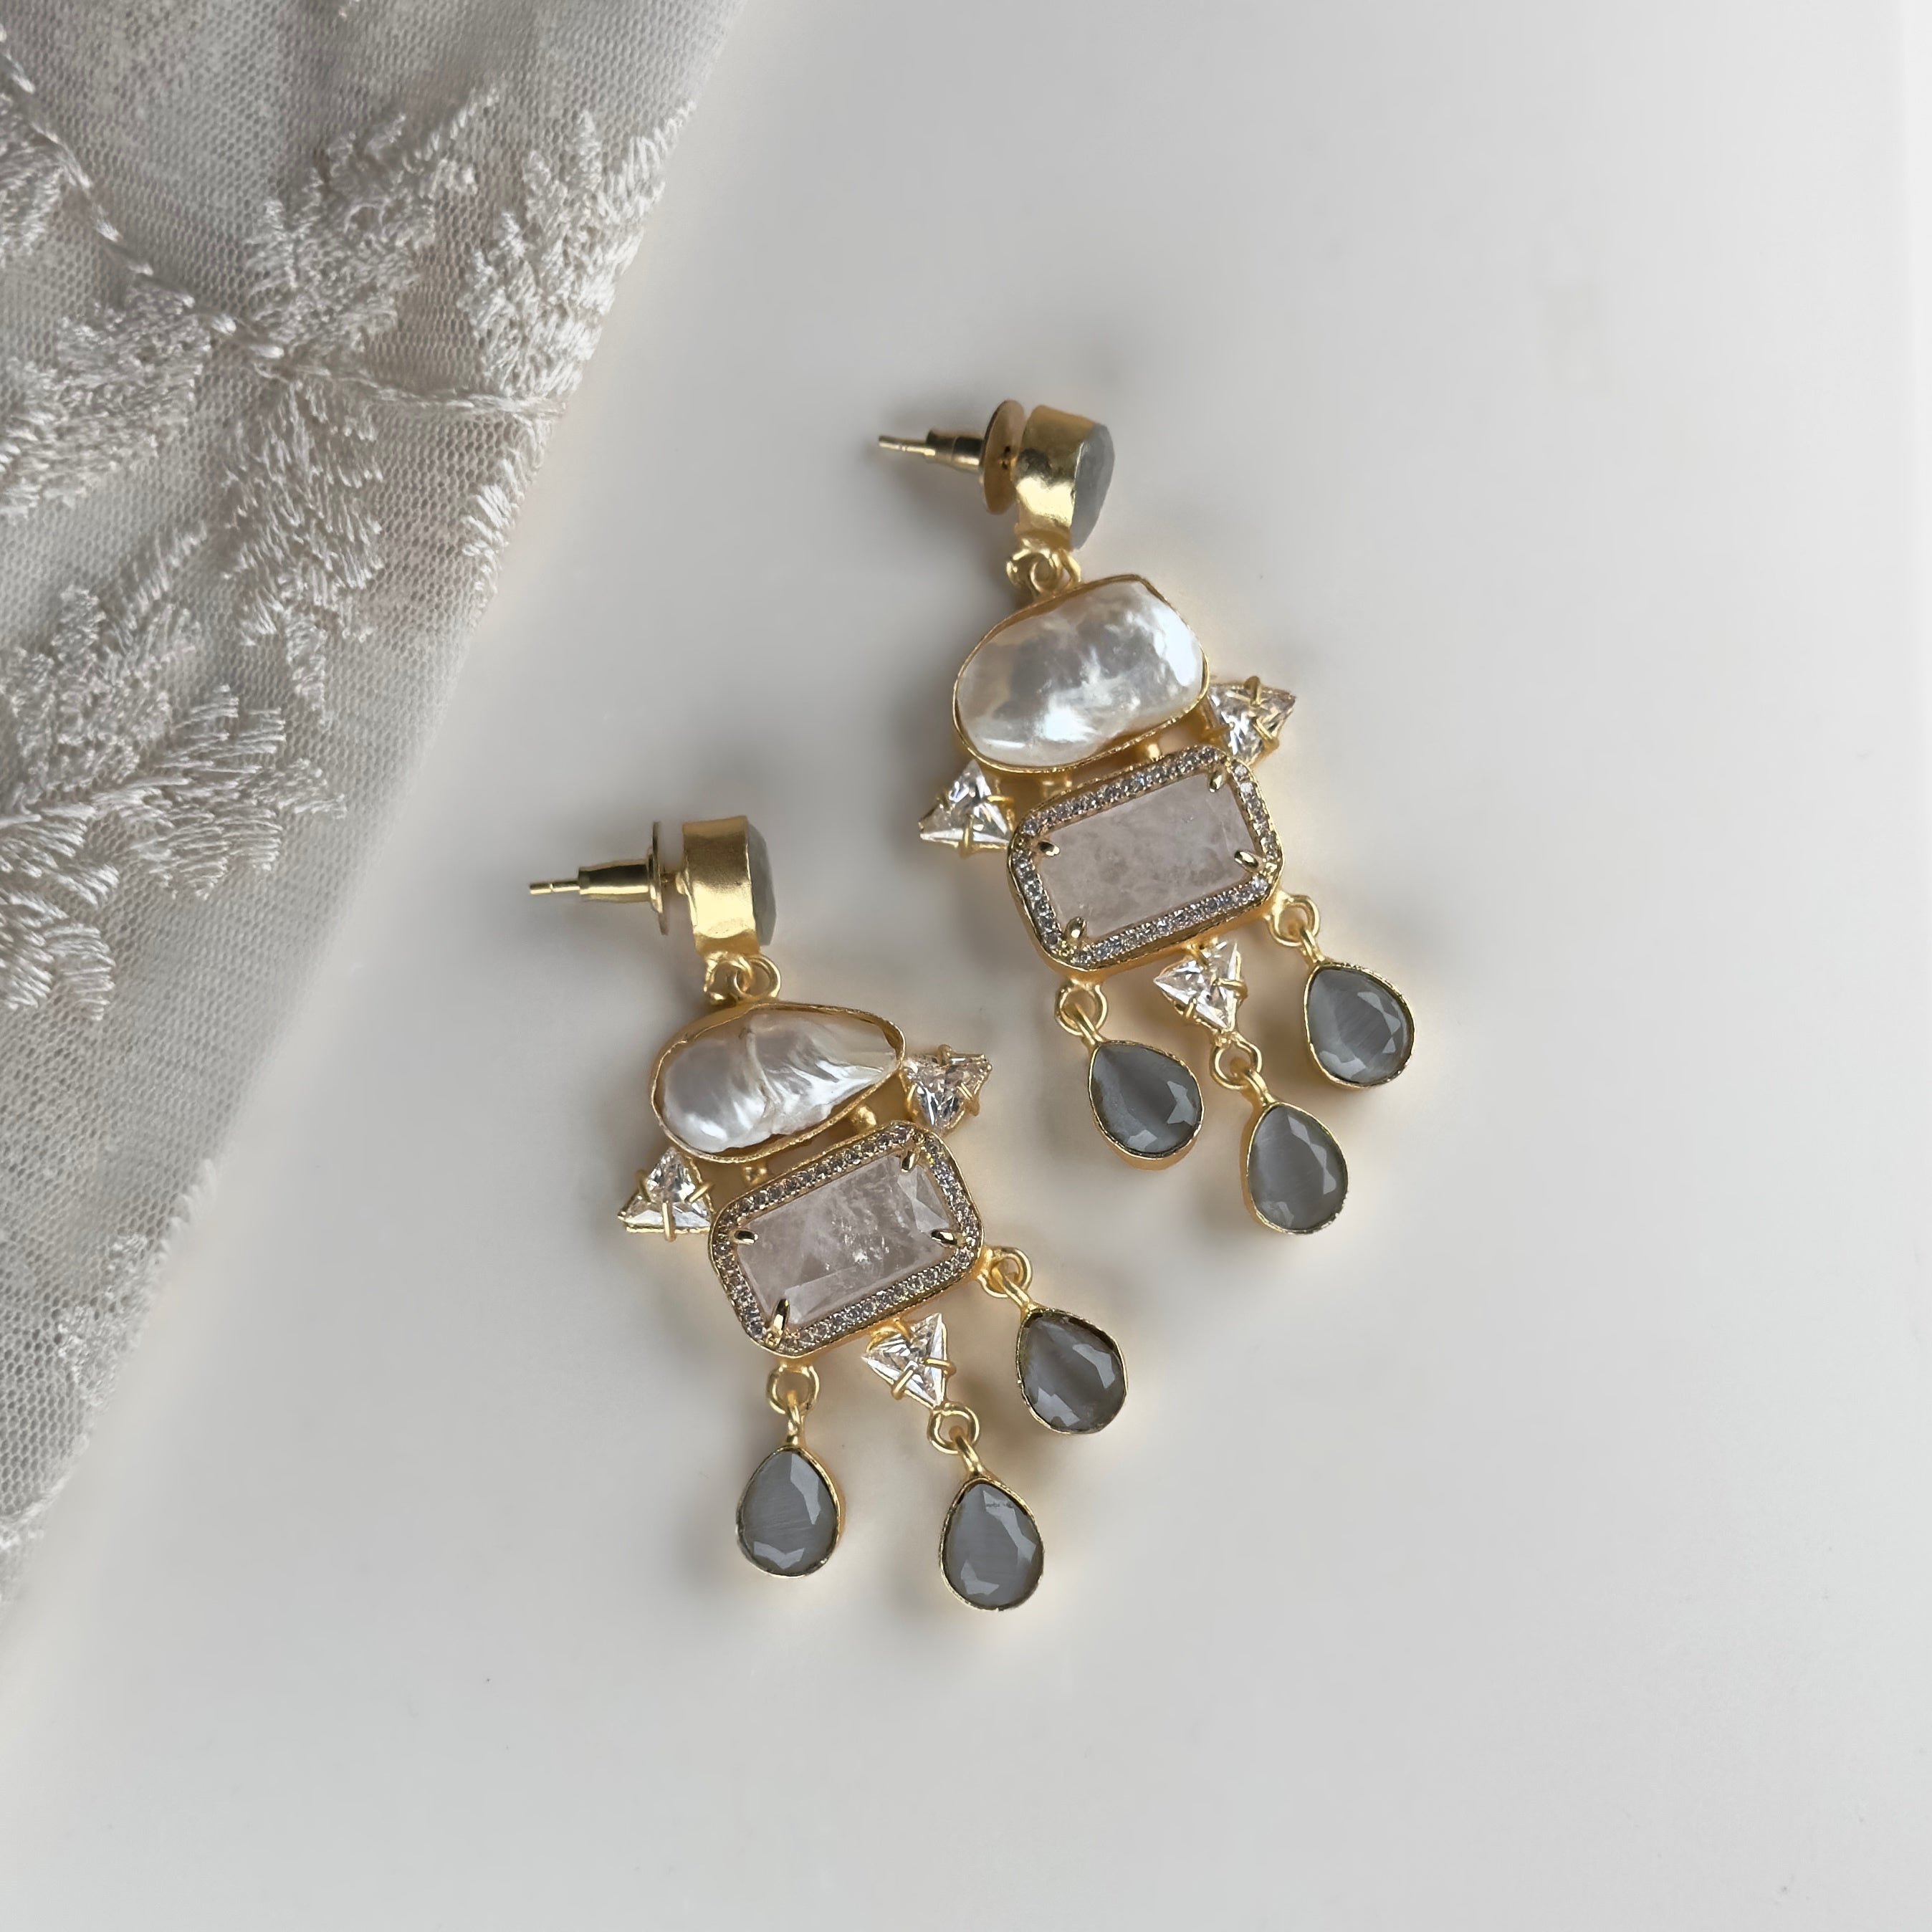 Complement your elegant style with our Safa Grey Drop Earrings. Featuring baroque pearls with beautiful hues of grey, white quartz and subtle accents of CZ crystals, these earrings add a touch of sophistication to any outfit. Elevate your look effortlessly and make a statement with these stunning earrings.